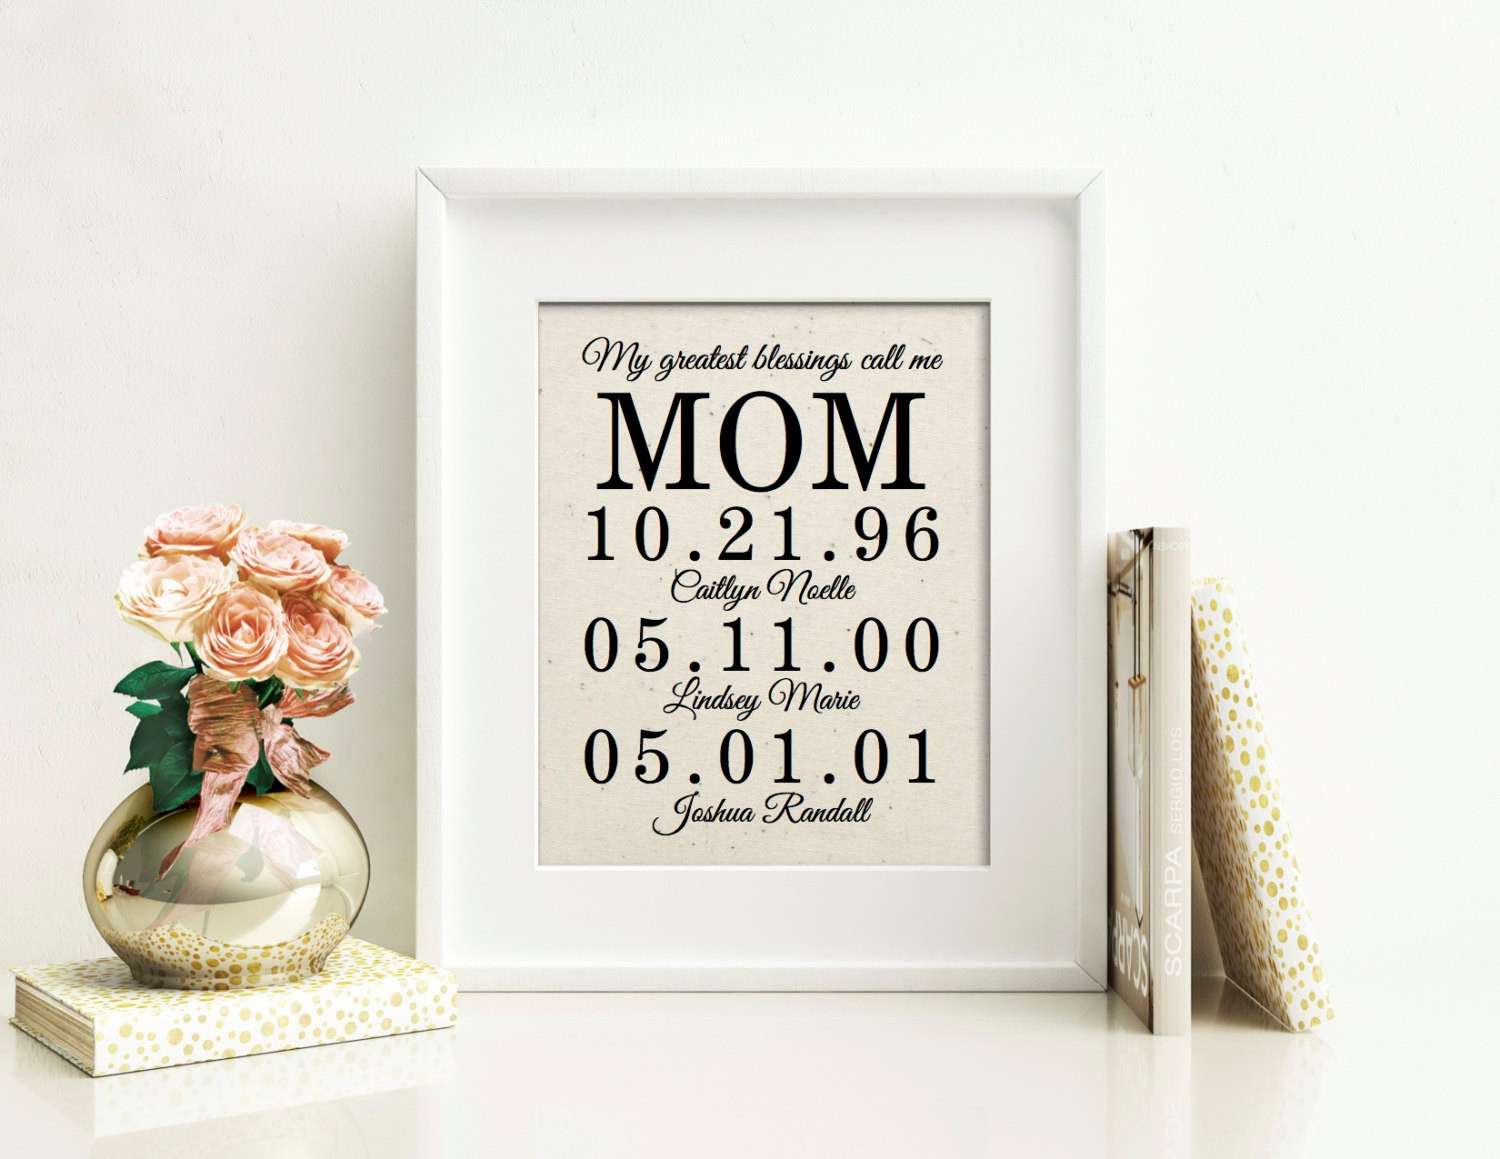 24 Of the Best Ideas for Unique Birthday Gifts for Mom ...